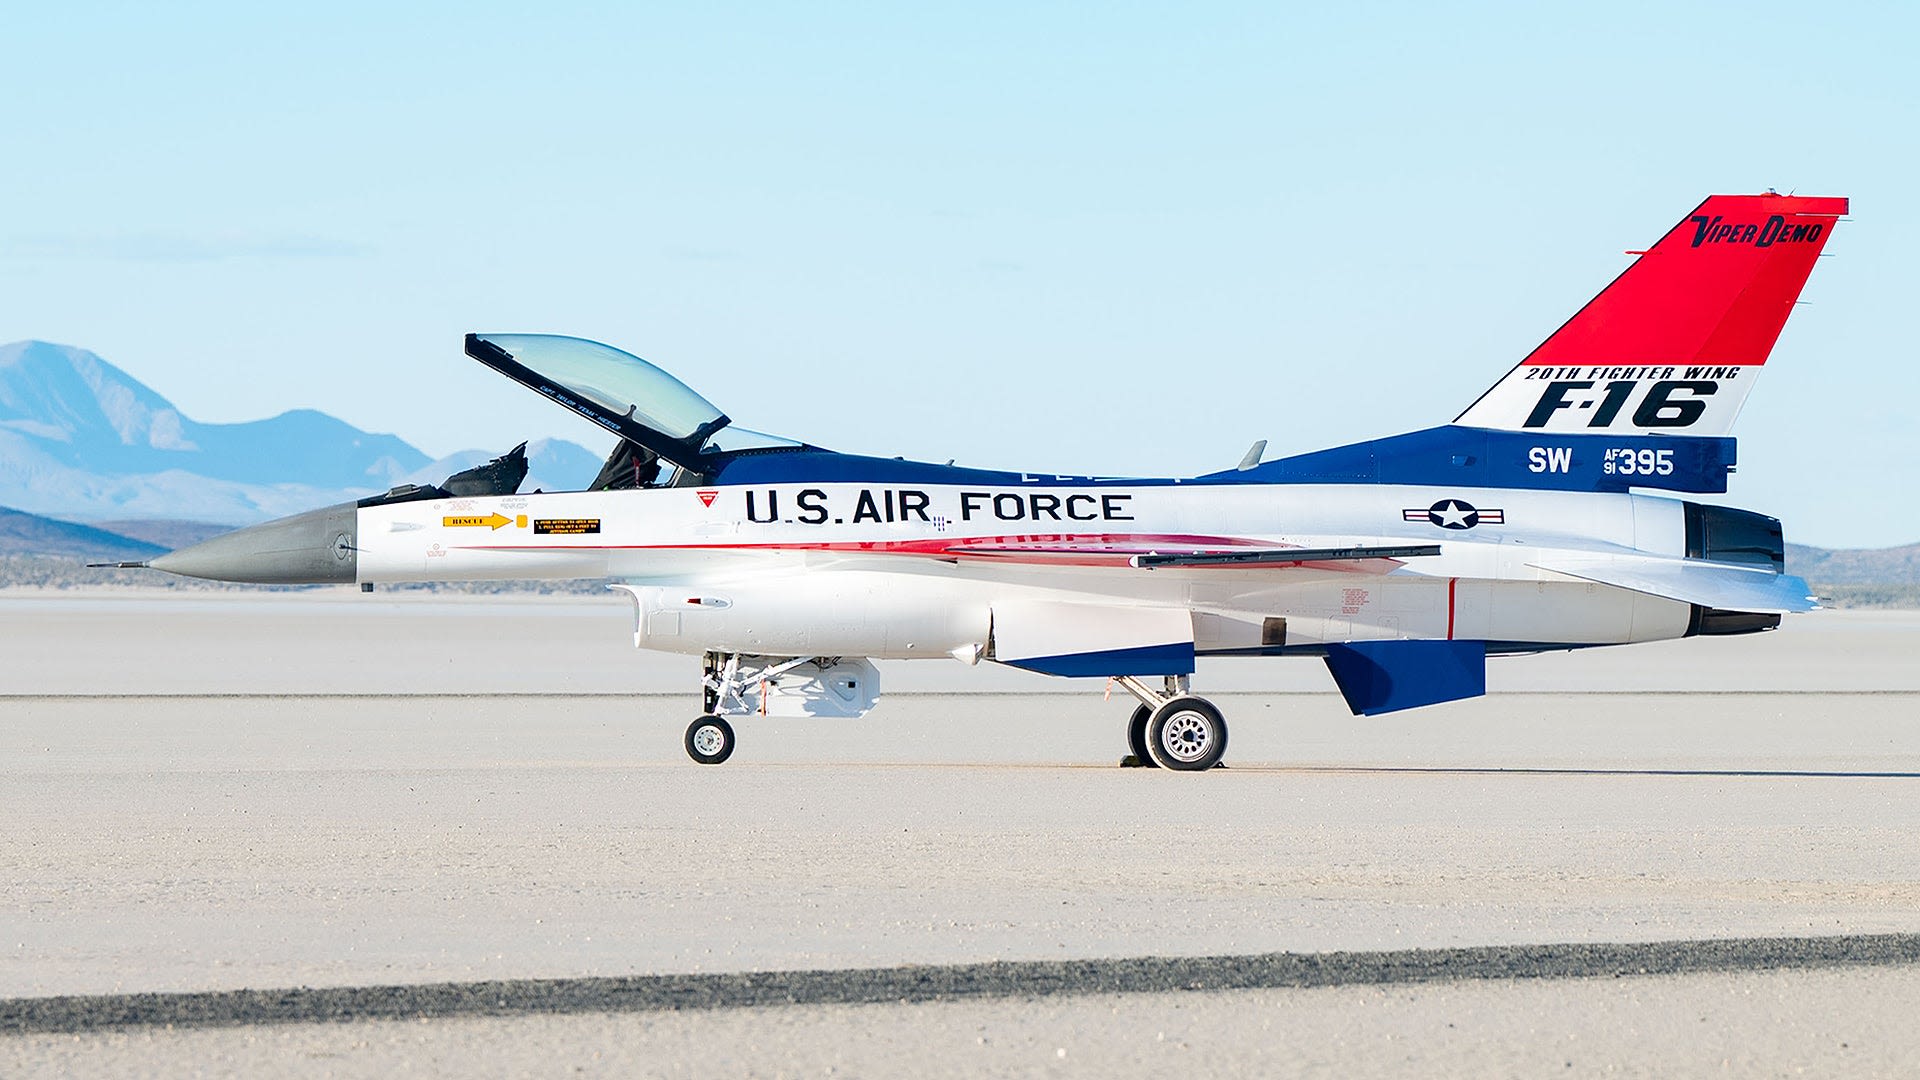 Viper Demo Team Secretly Painted Jet In YF-16 Scheme To Celebrate Type's 50th Anniversary